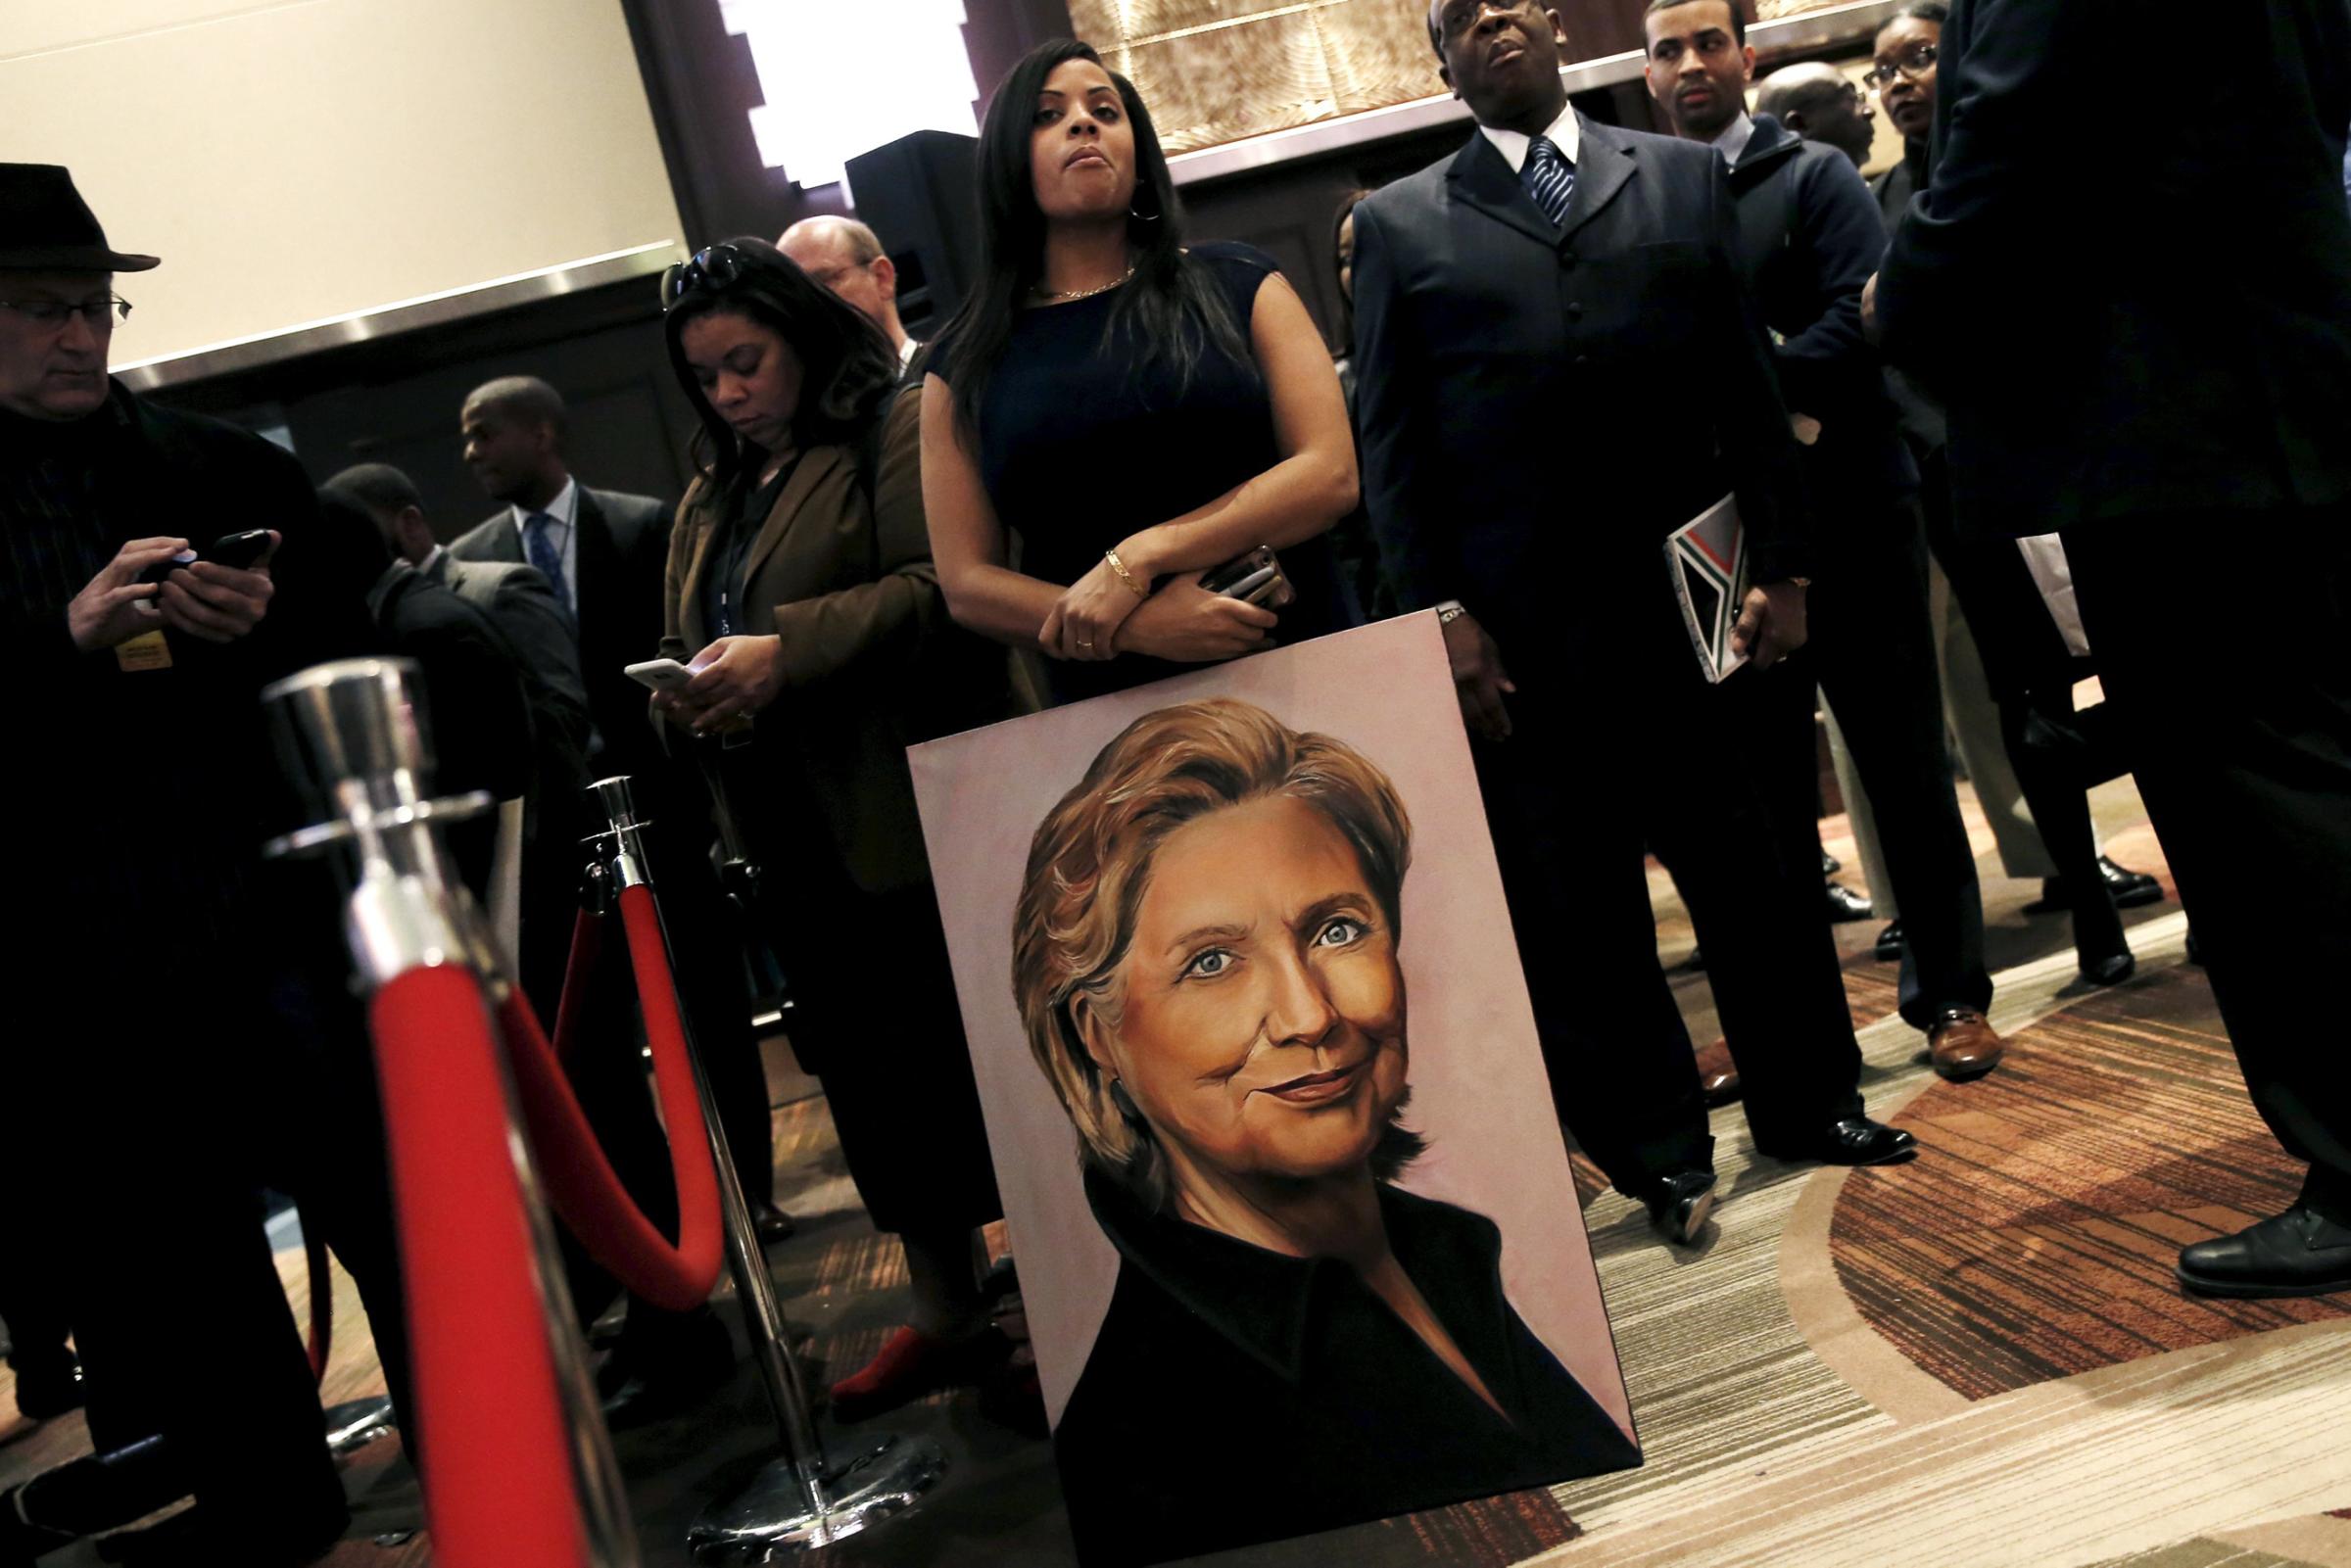 A supporter of Hillary Clinton stands with a painting at the National Action Network's 25th Annual Convention in New York on April 13, 2016.